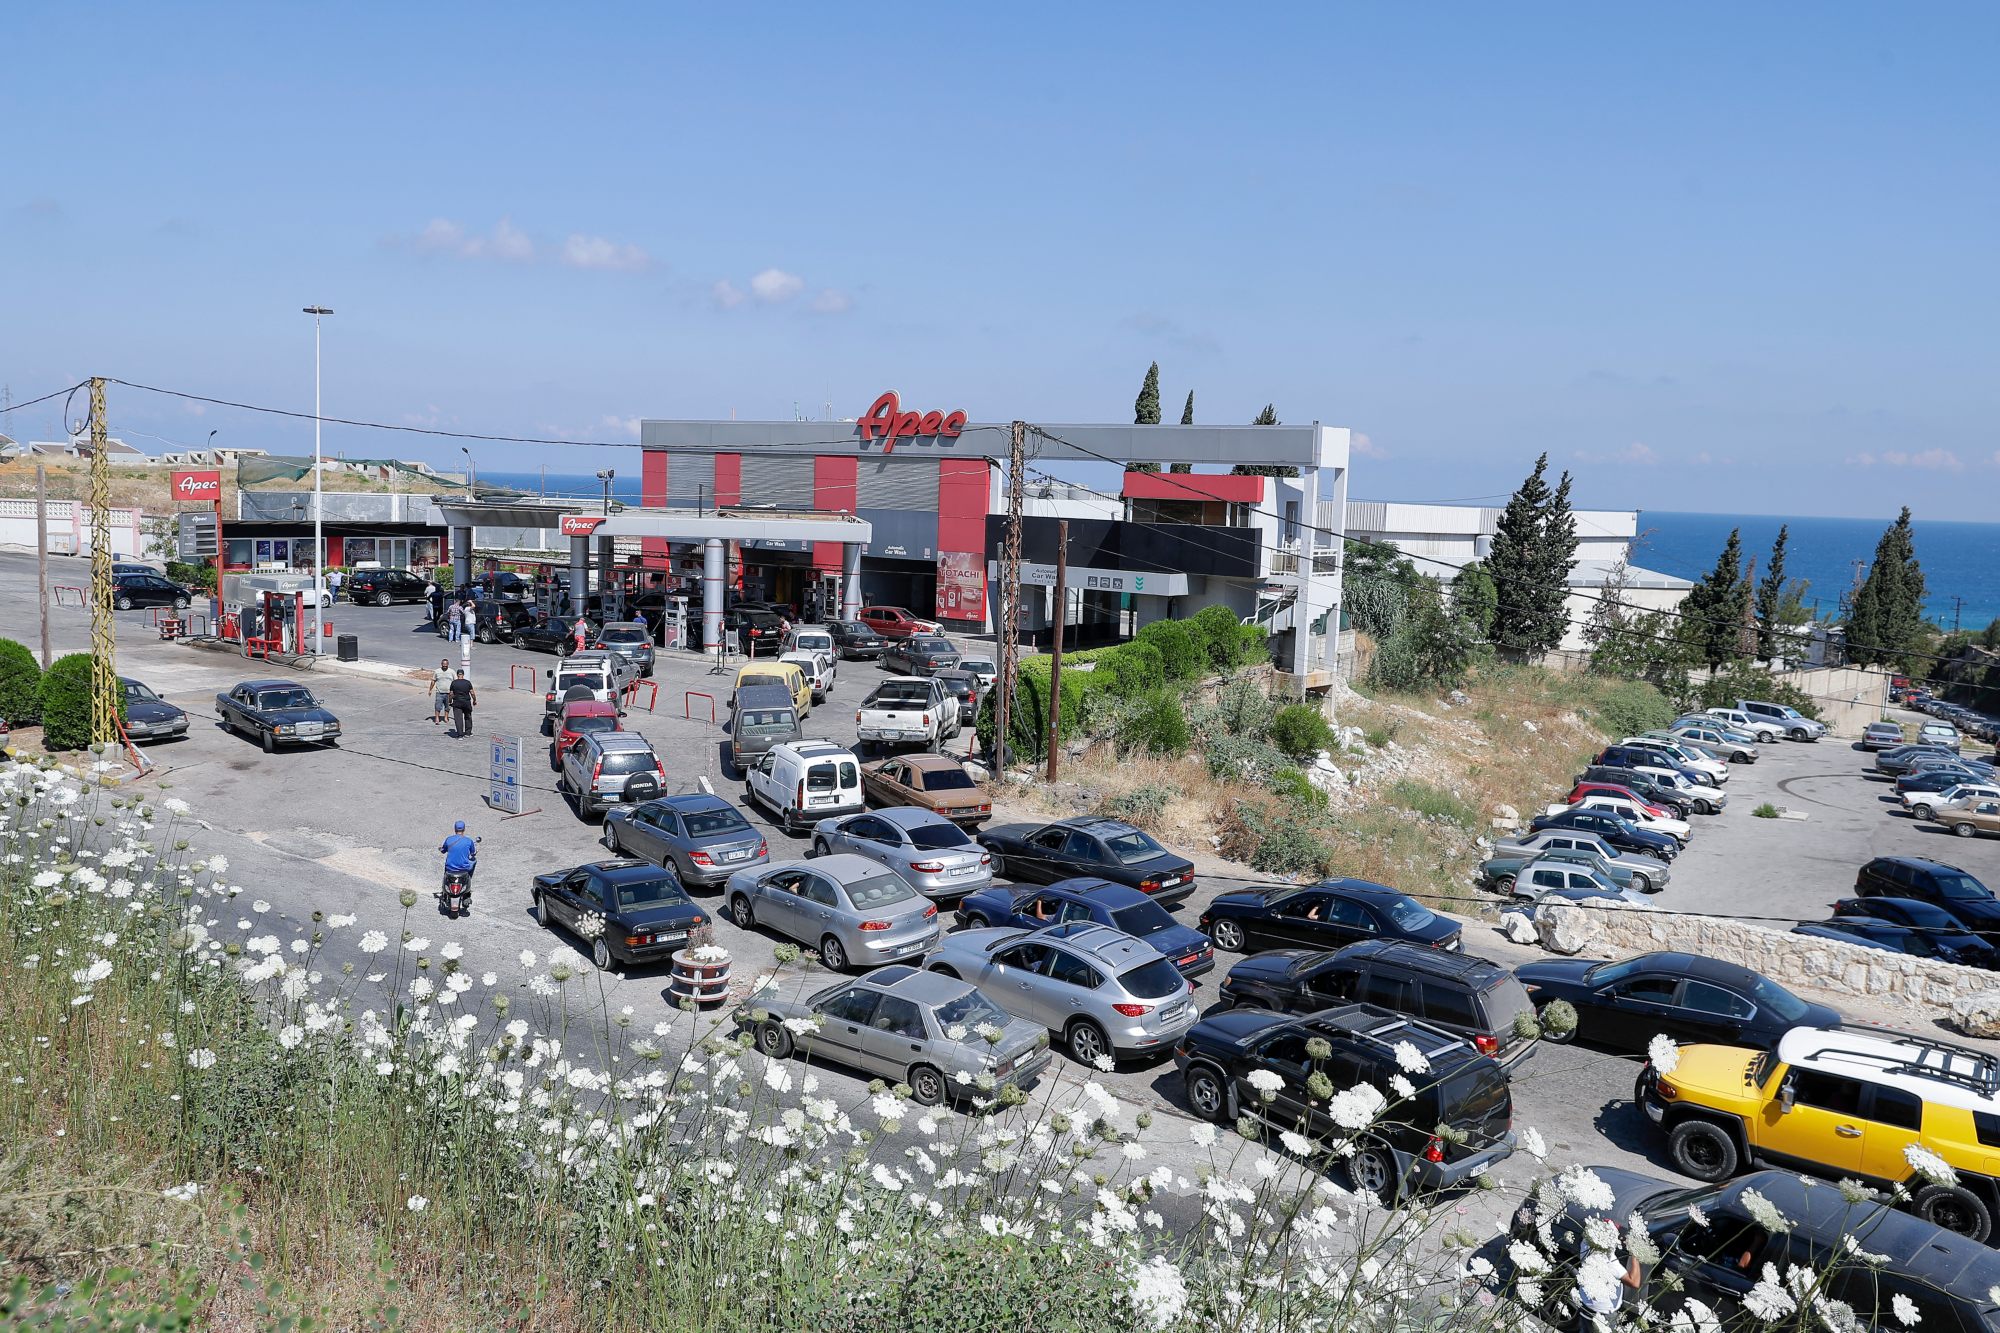 Vehicles queue up at a petrol station in the Balamand area on the coastal highway linking Lebanon's capital to the country's north on 21 June 2021 (AFP)